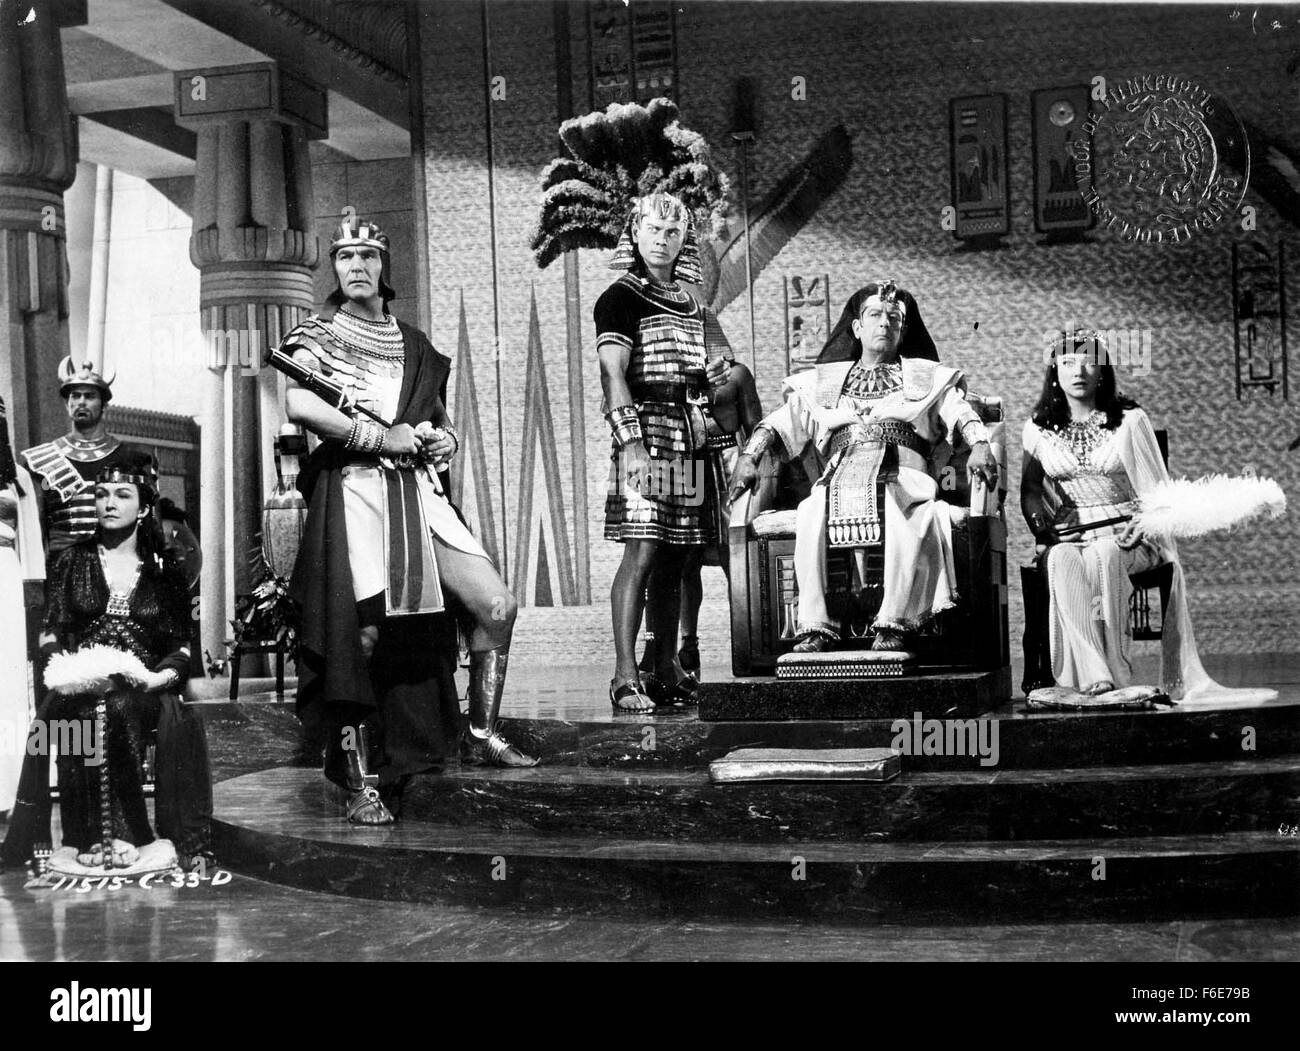 RELEASED DATE: Oct 05, 1956. MOVIE TITLE: The Ten Commandments. STUDIO: Paramount Pictures. PLOT: Moses leads the slaves from the tyranny of the Egyptian pharaoh and into the desert where he is later given the law of God. Once the pharaoh's chief architect, Moses receives the attentions of the Queen until he rebels and is cast into exile. PICTURED: Charleton Heston, Yul Bryner, Anne Baxter, Edward G. Robinson. Stock Photo